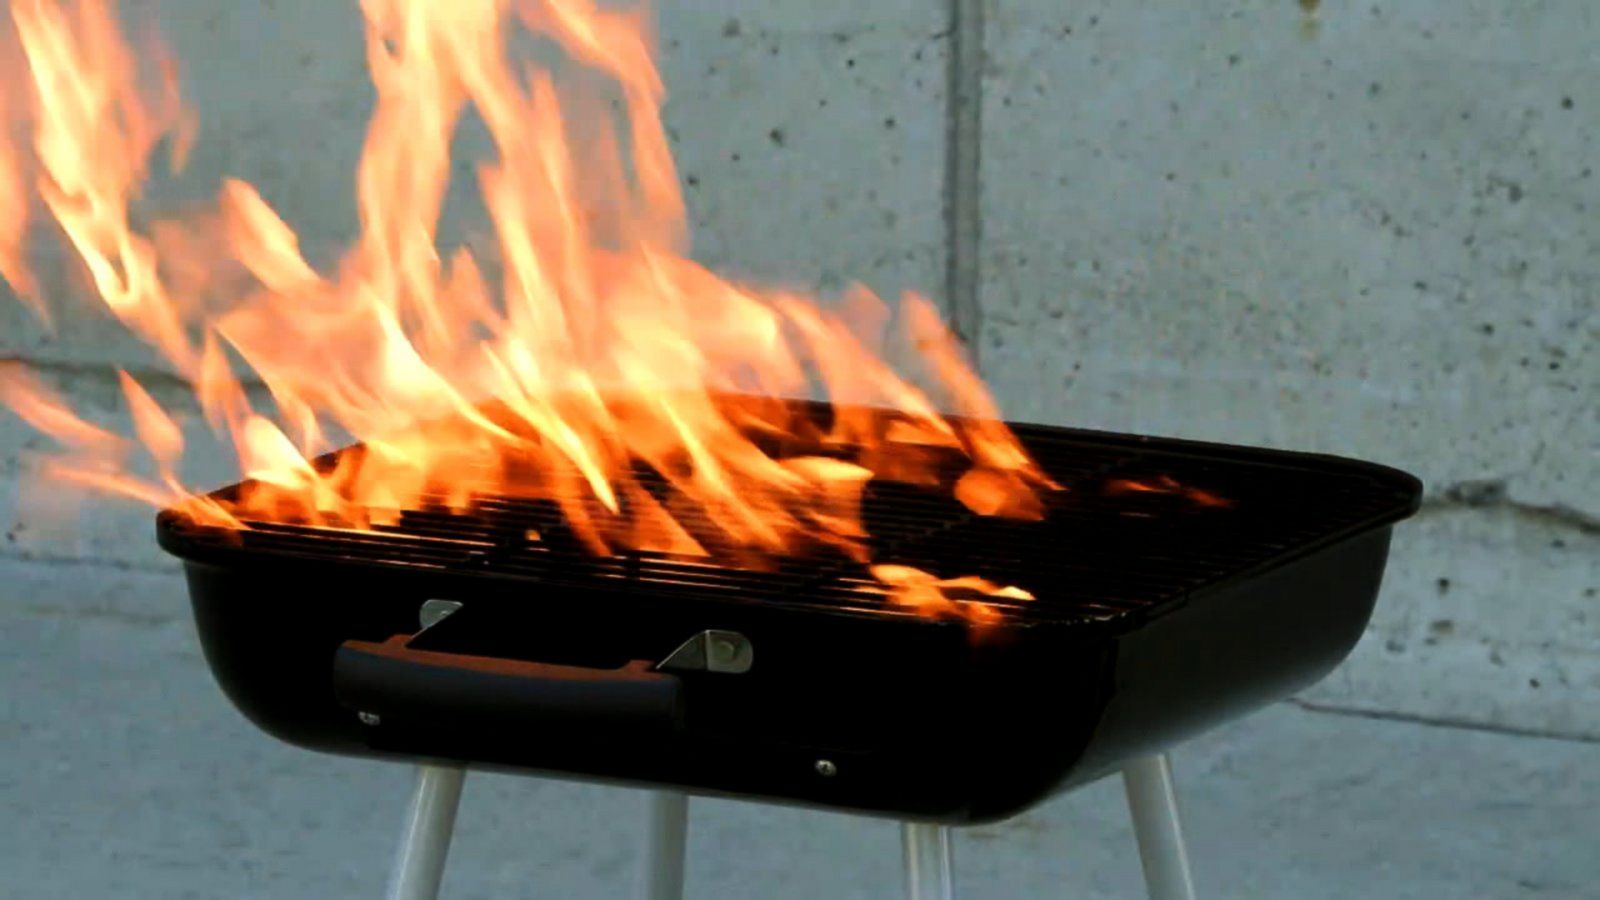 VIDEO: Safety tips for a safe July Fourth BBQ